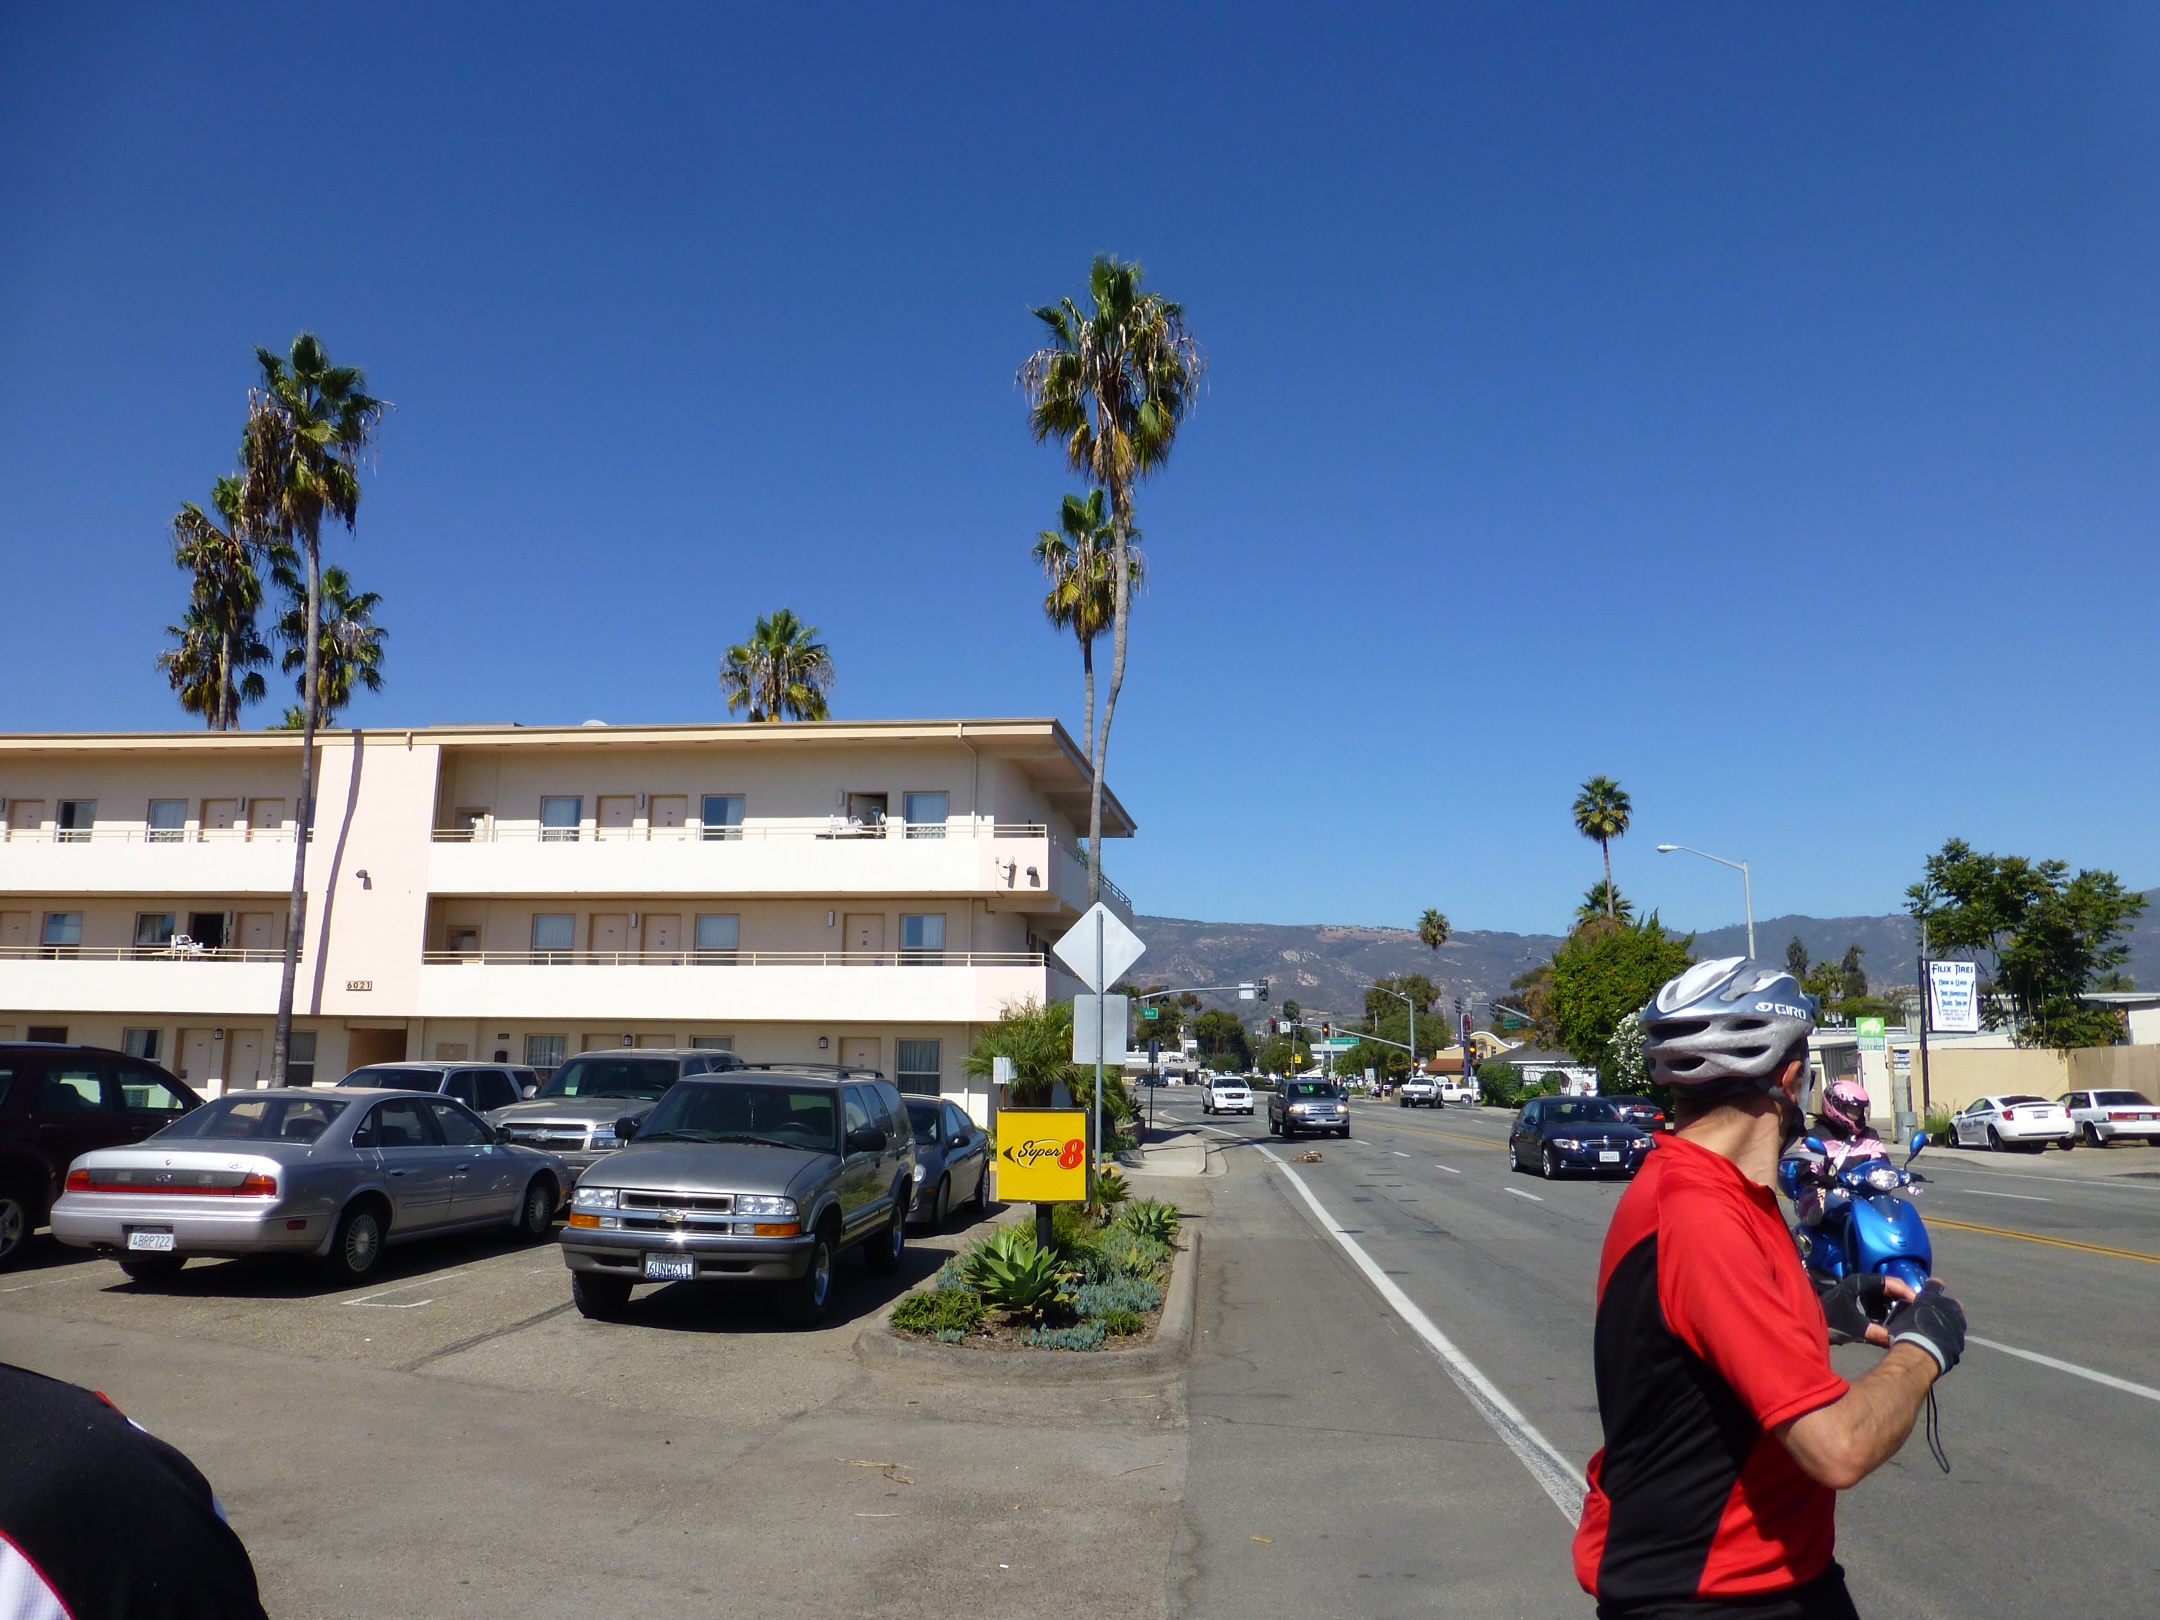 Day 7 – Tuesday 16 October – Lompoc to Ventura